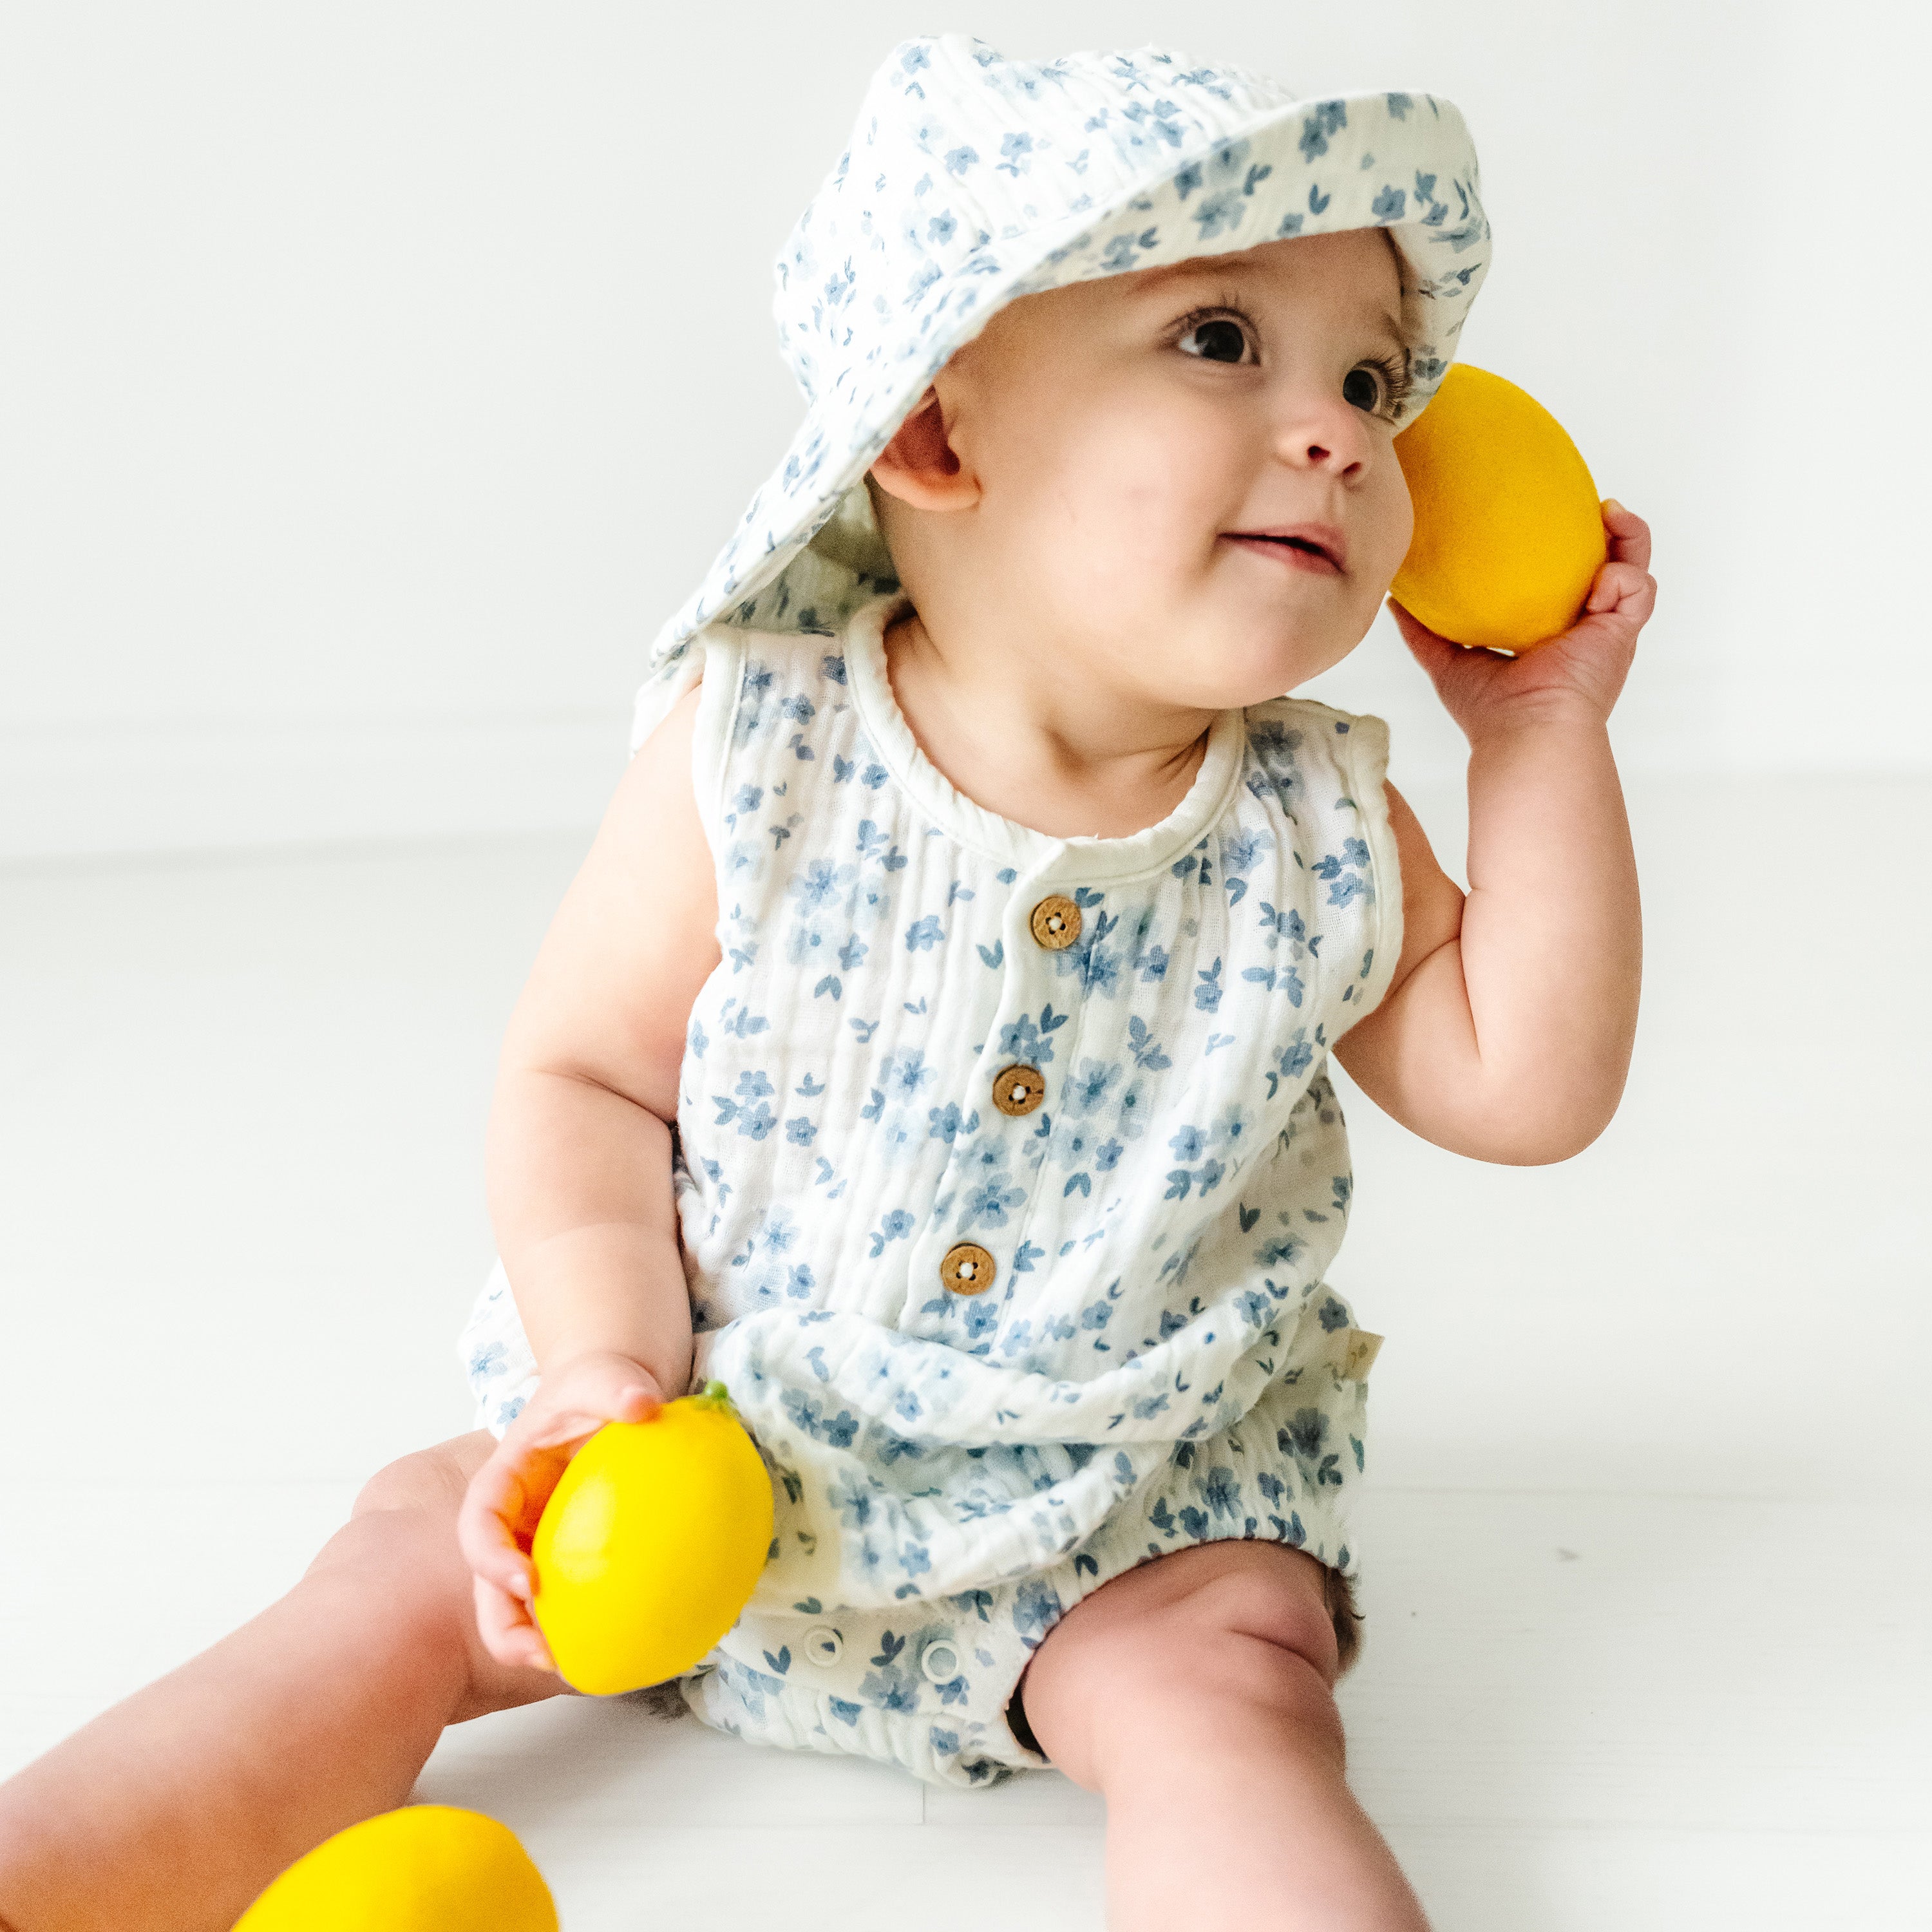 A toddler in a floral outfit and Organic Muslin Bucket Sun Hat - Periwinkle by Makemake Organics sitting and holding yellow balls, looking upwards with a curious expression on a white background.